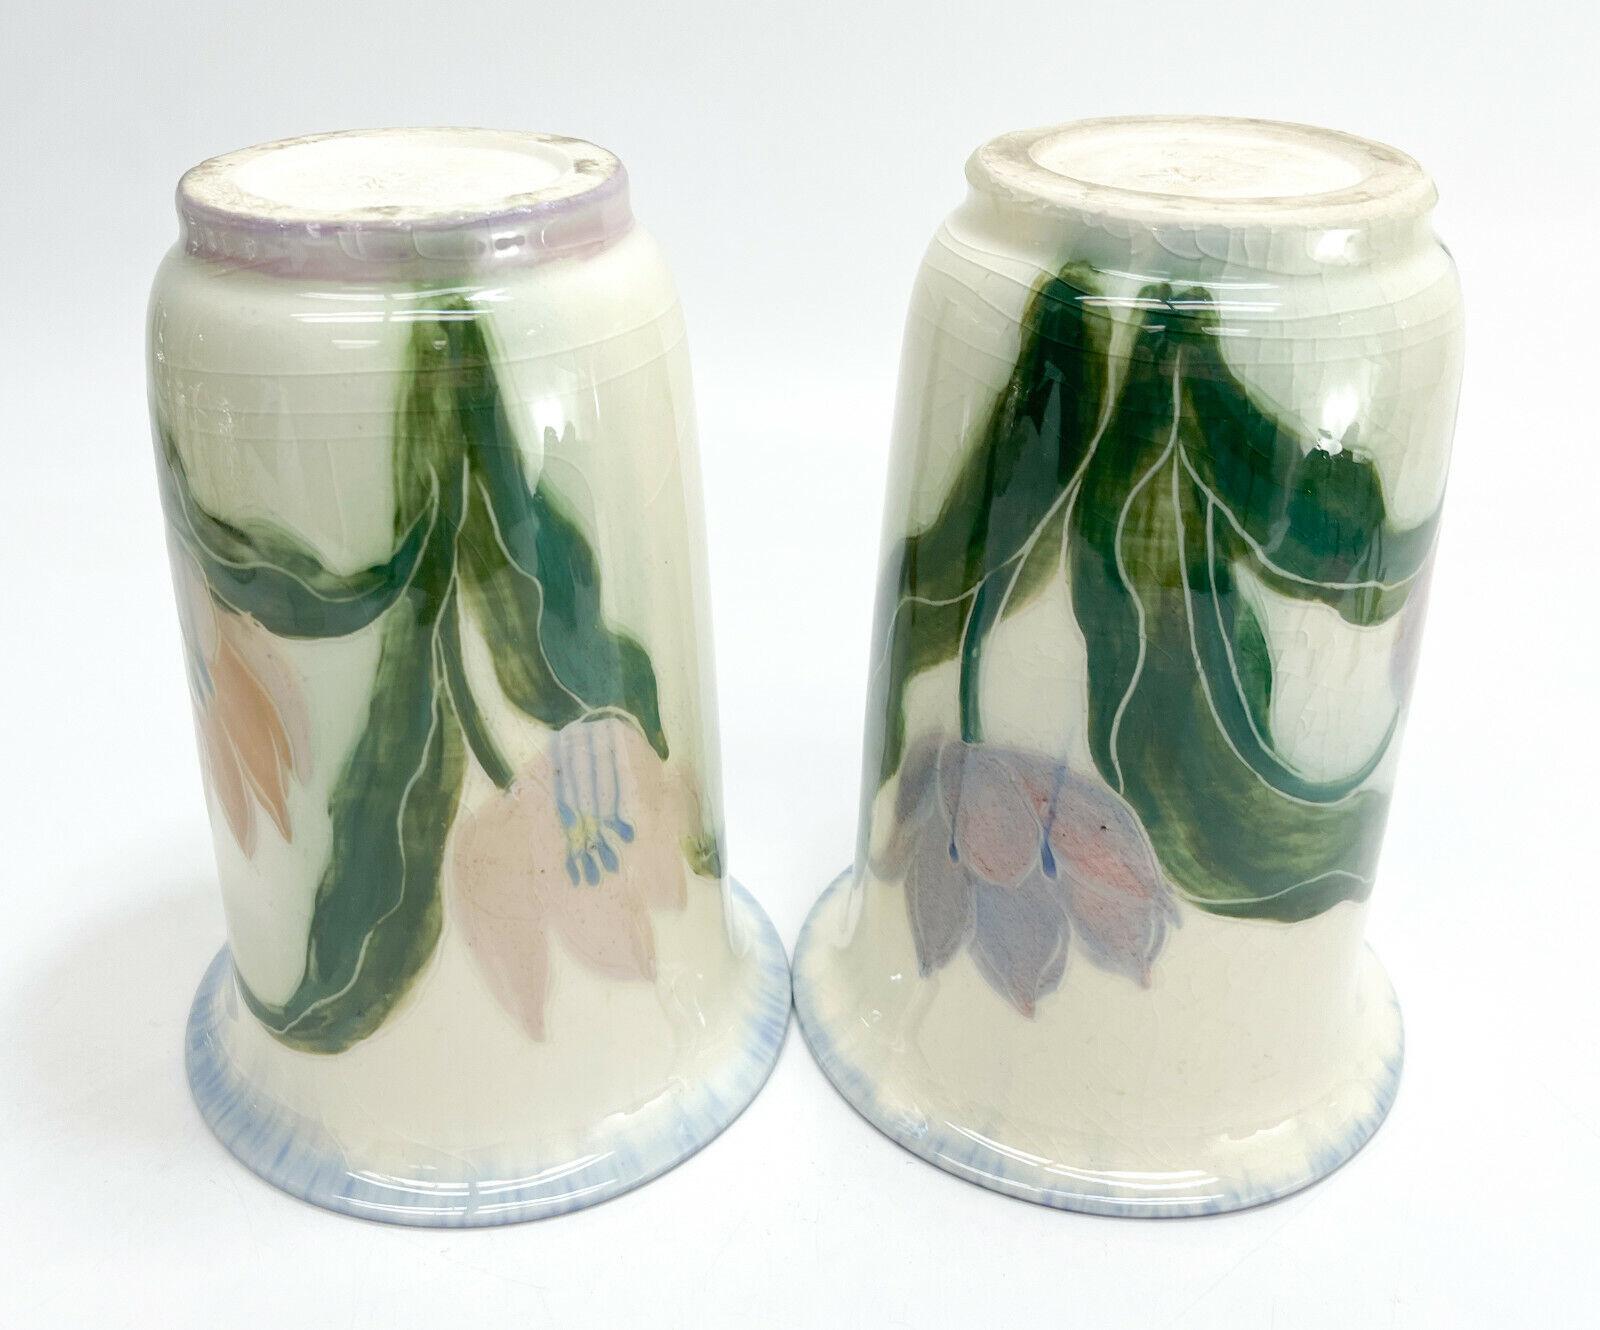 Pair of Rookwood Pottery Vases by E.T. Hurley #6806, Hand Painted Tulips, 1943 For Sale 3